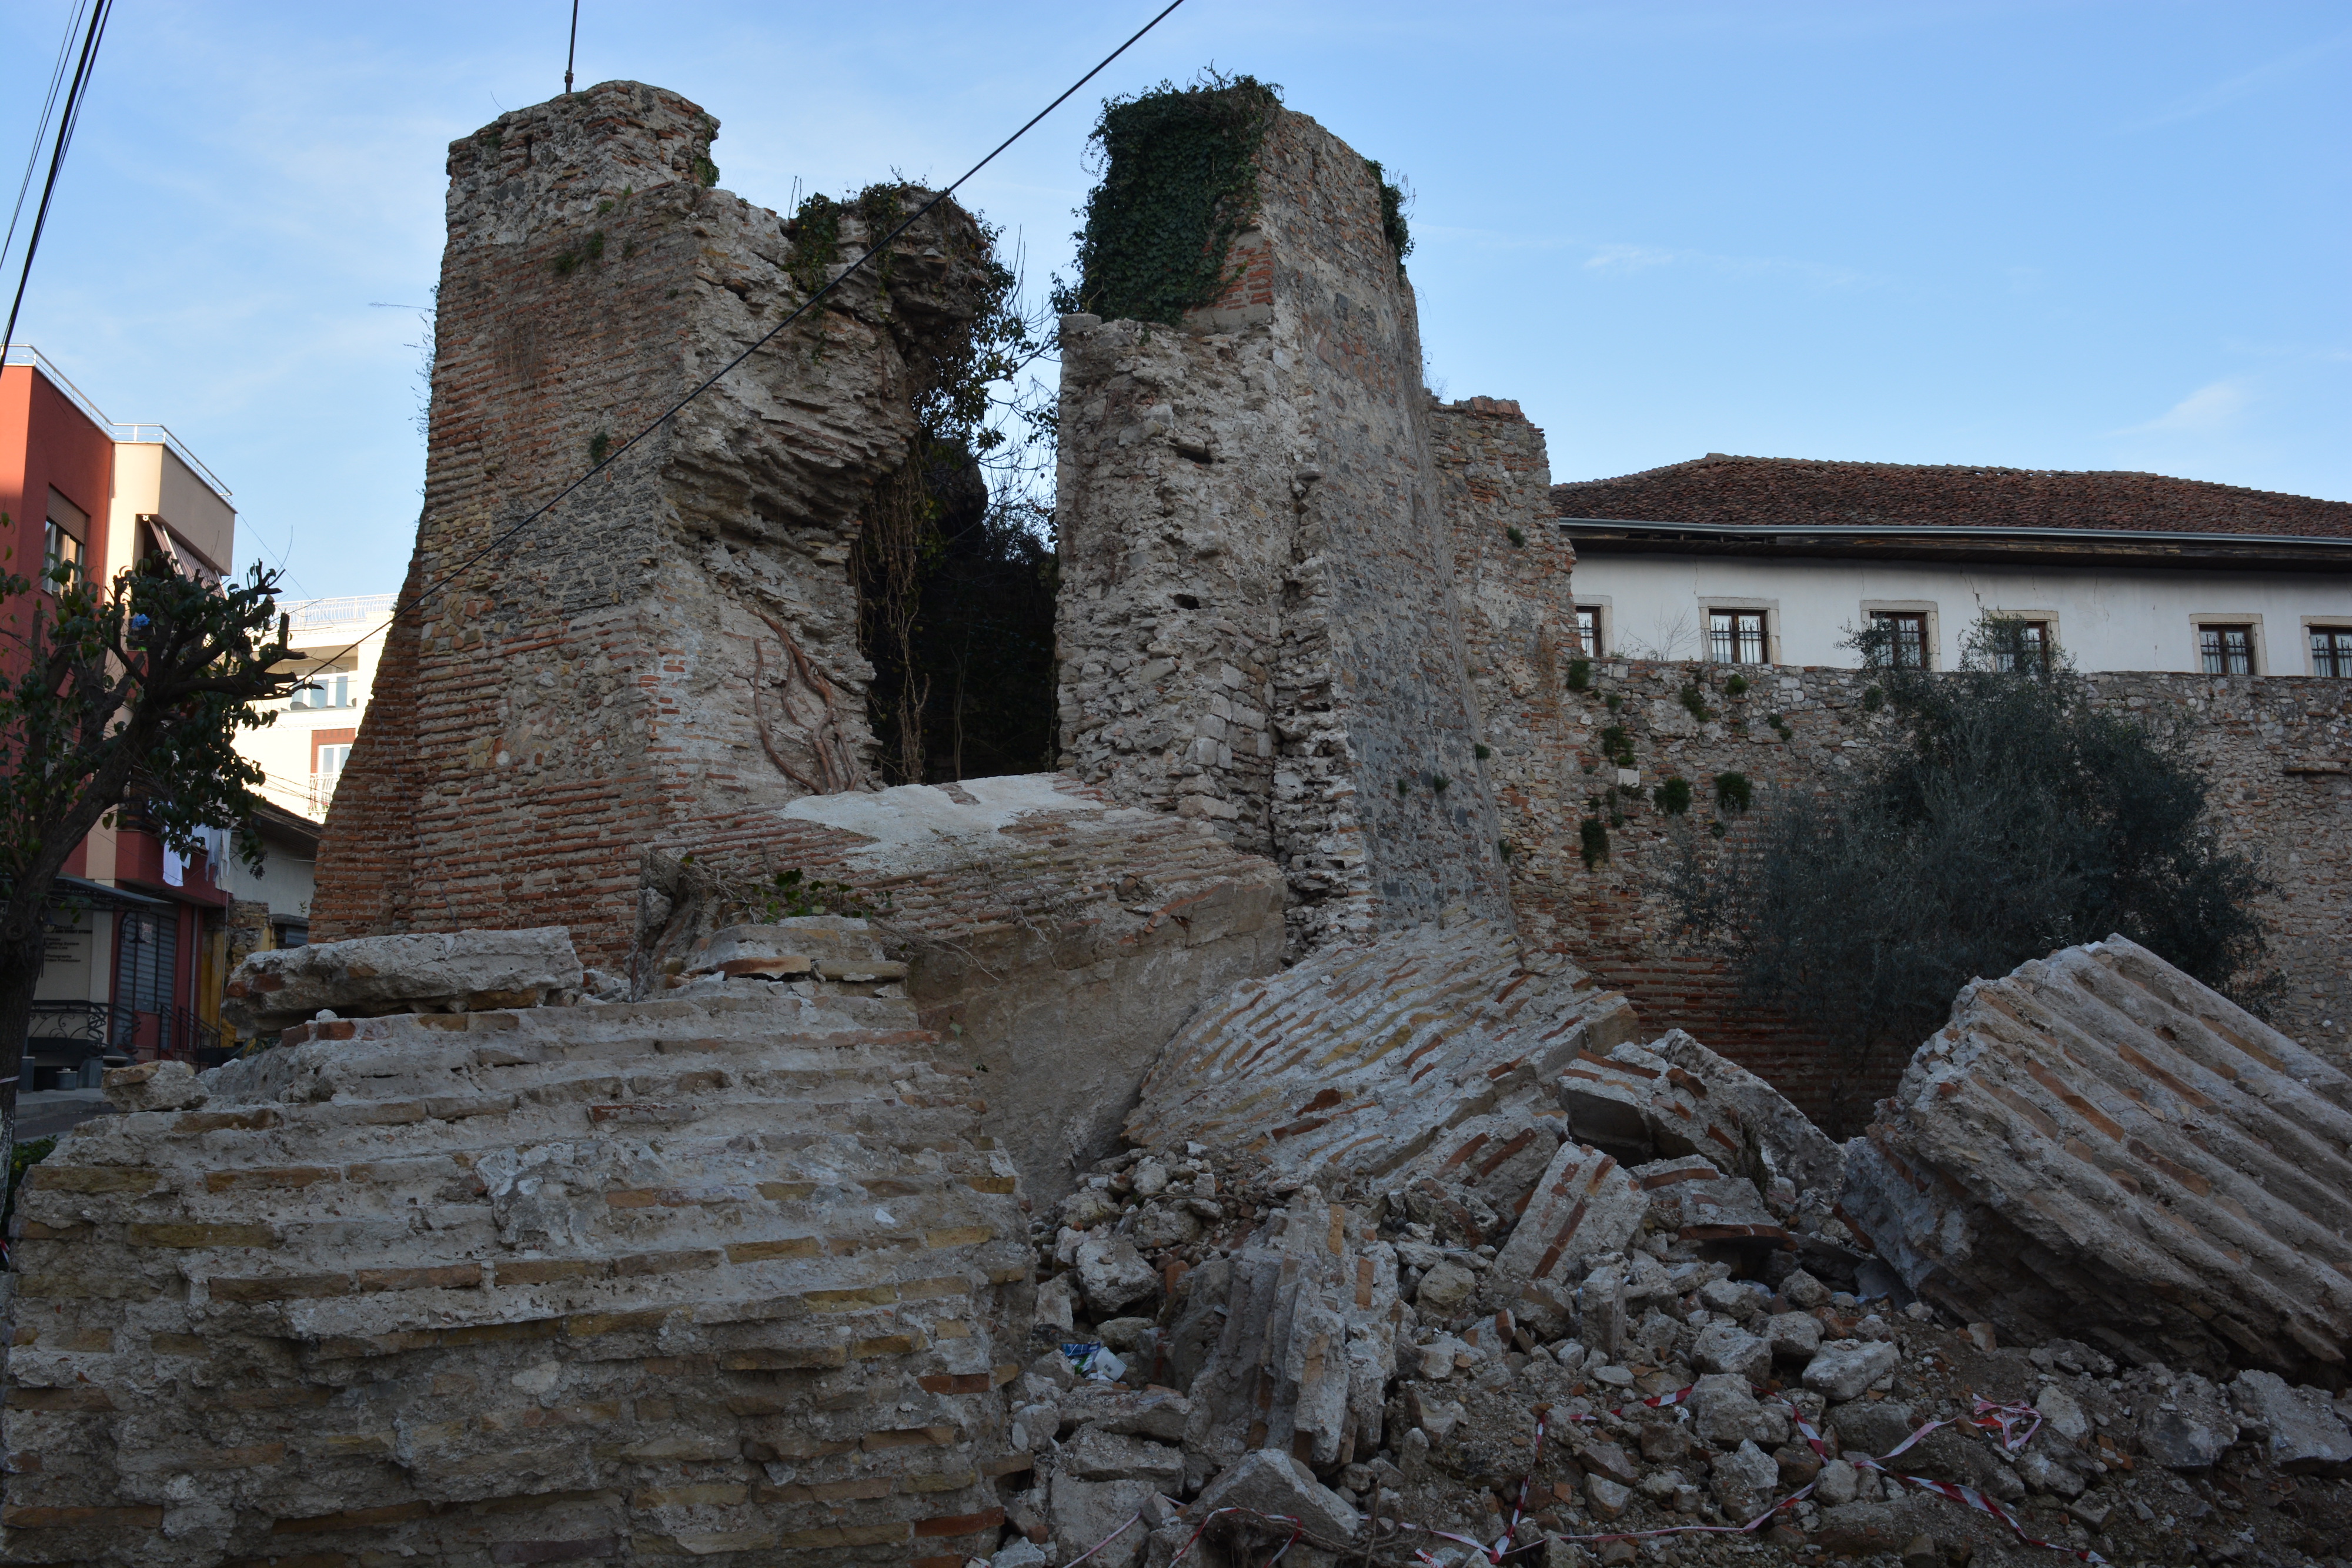 An old byzantine tower, broken down by the earthquake